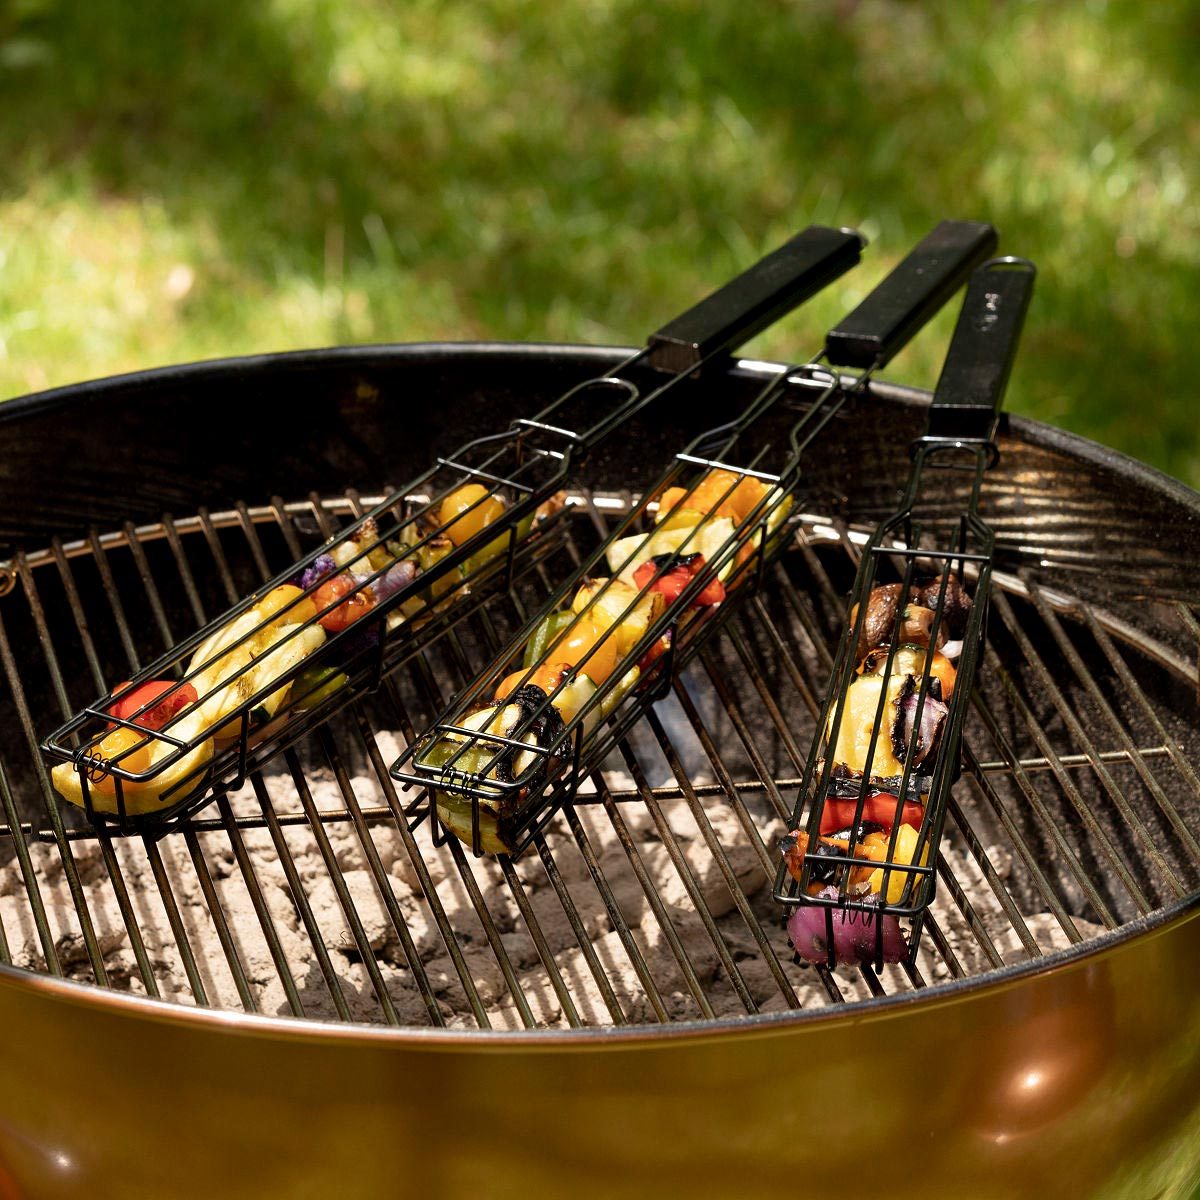 Best BBQ Gifts For The Outdoor Grilling Enthusiast - Vindulge